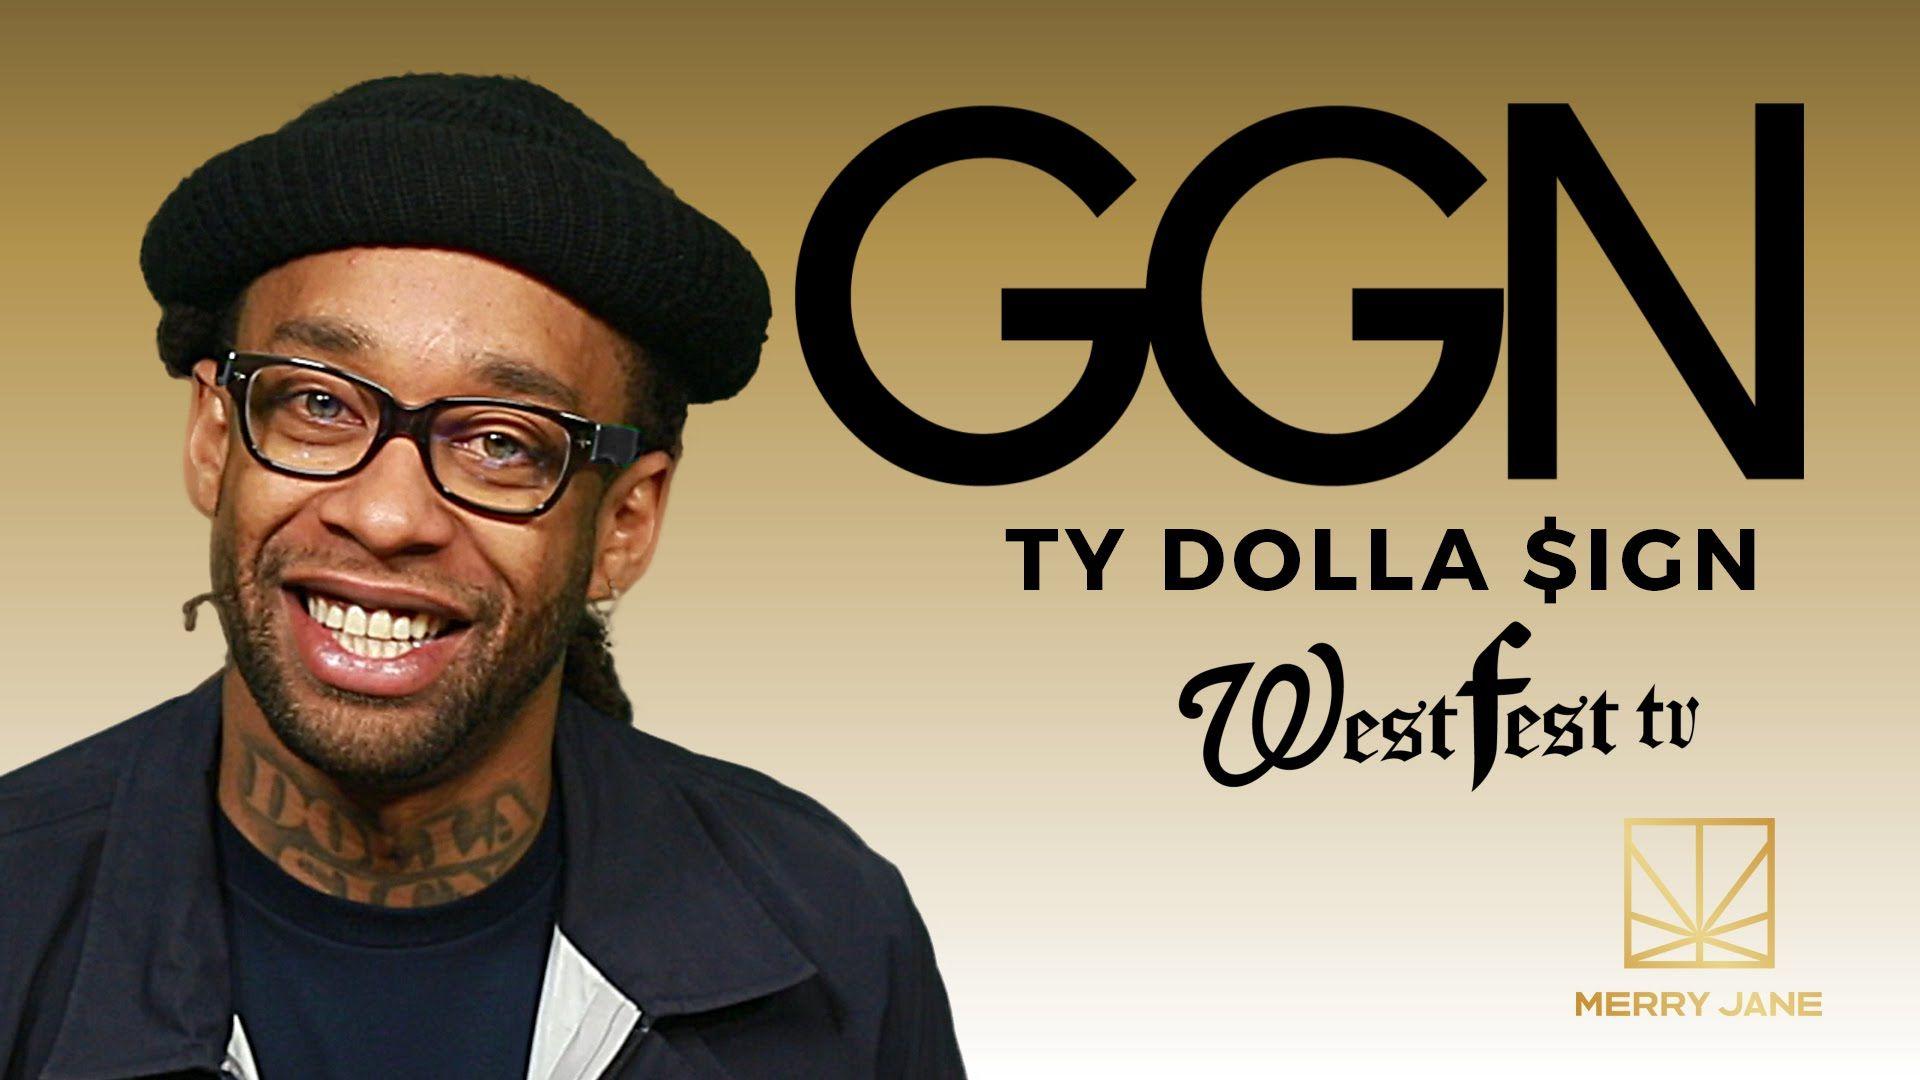 GGN Ty Dolla $ign